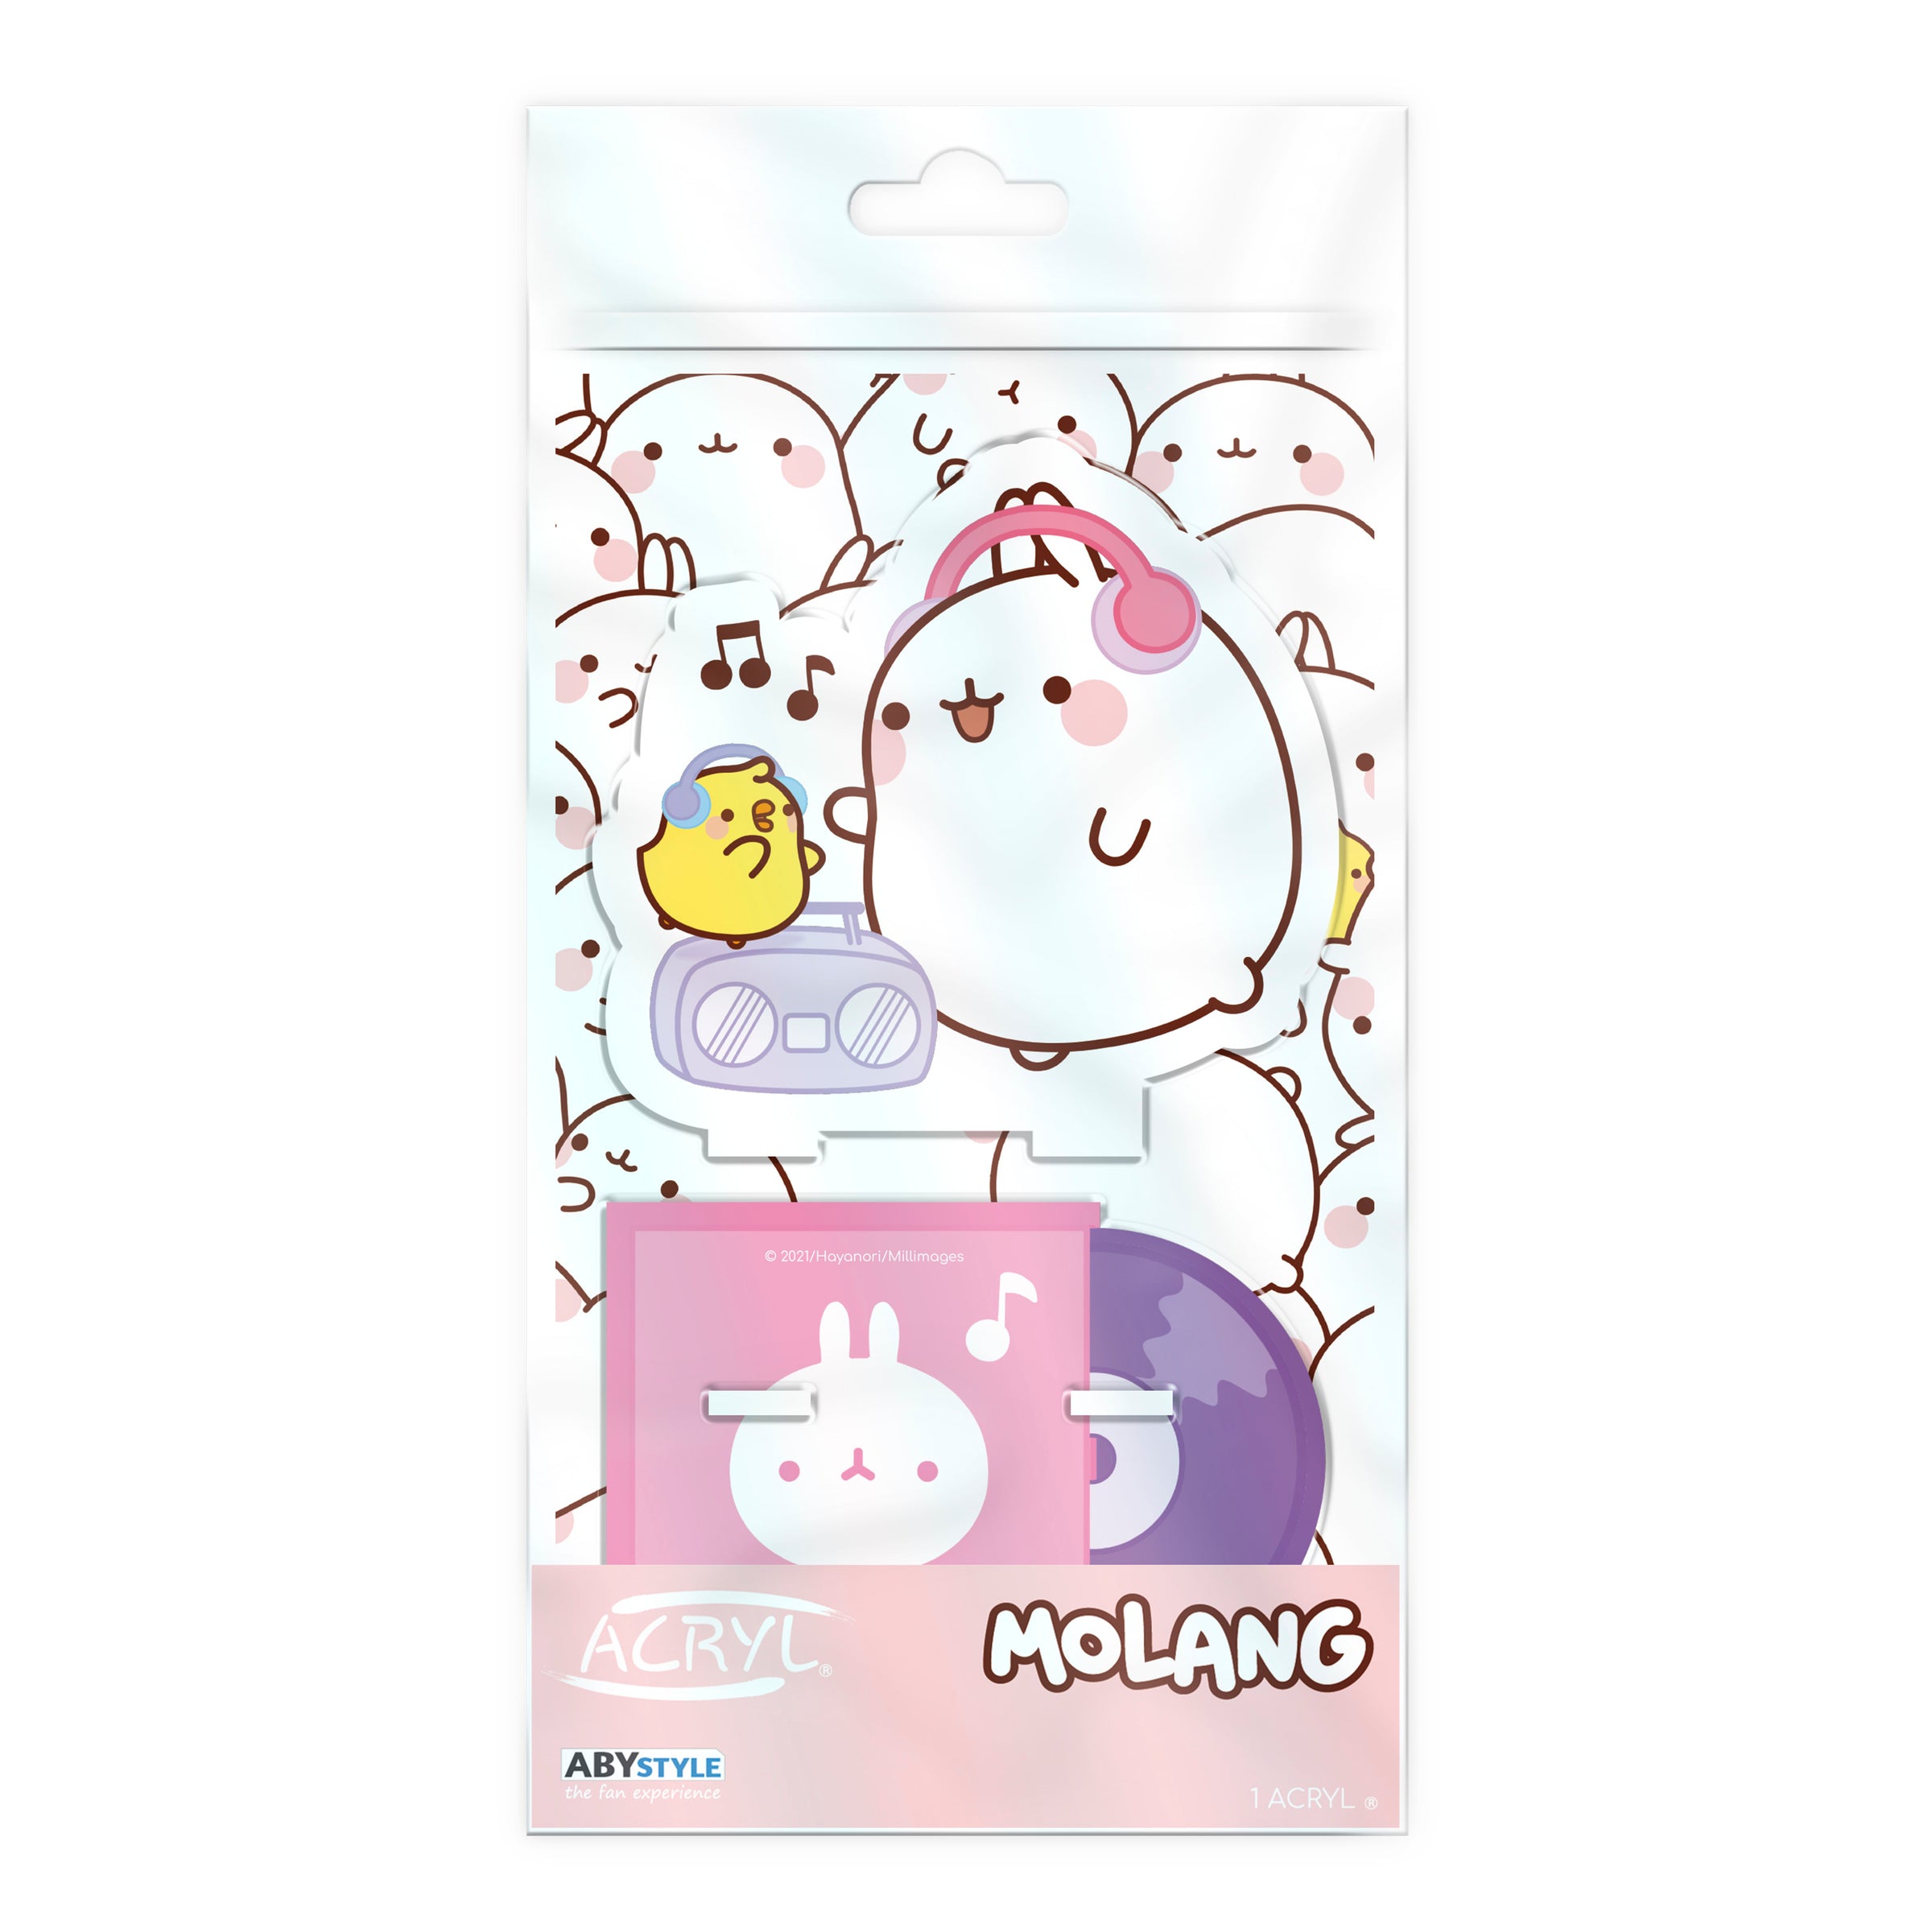 Molang Heads to Japan Expo with Exclusive New Merchandise - aNb Media, Inc.